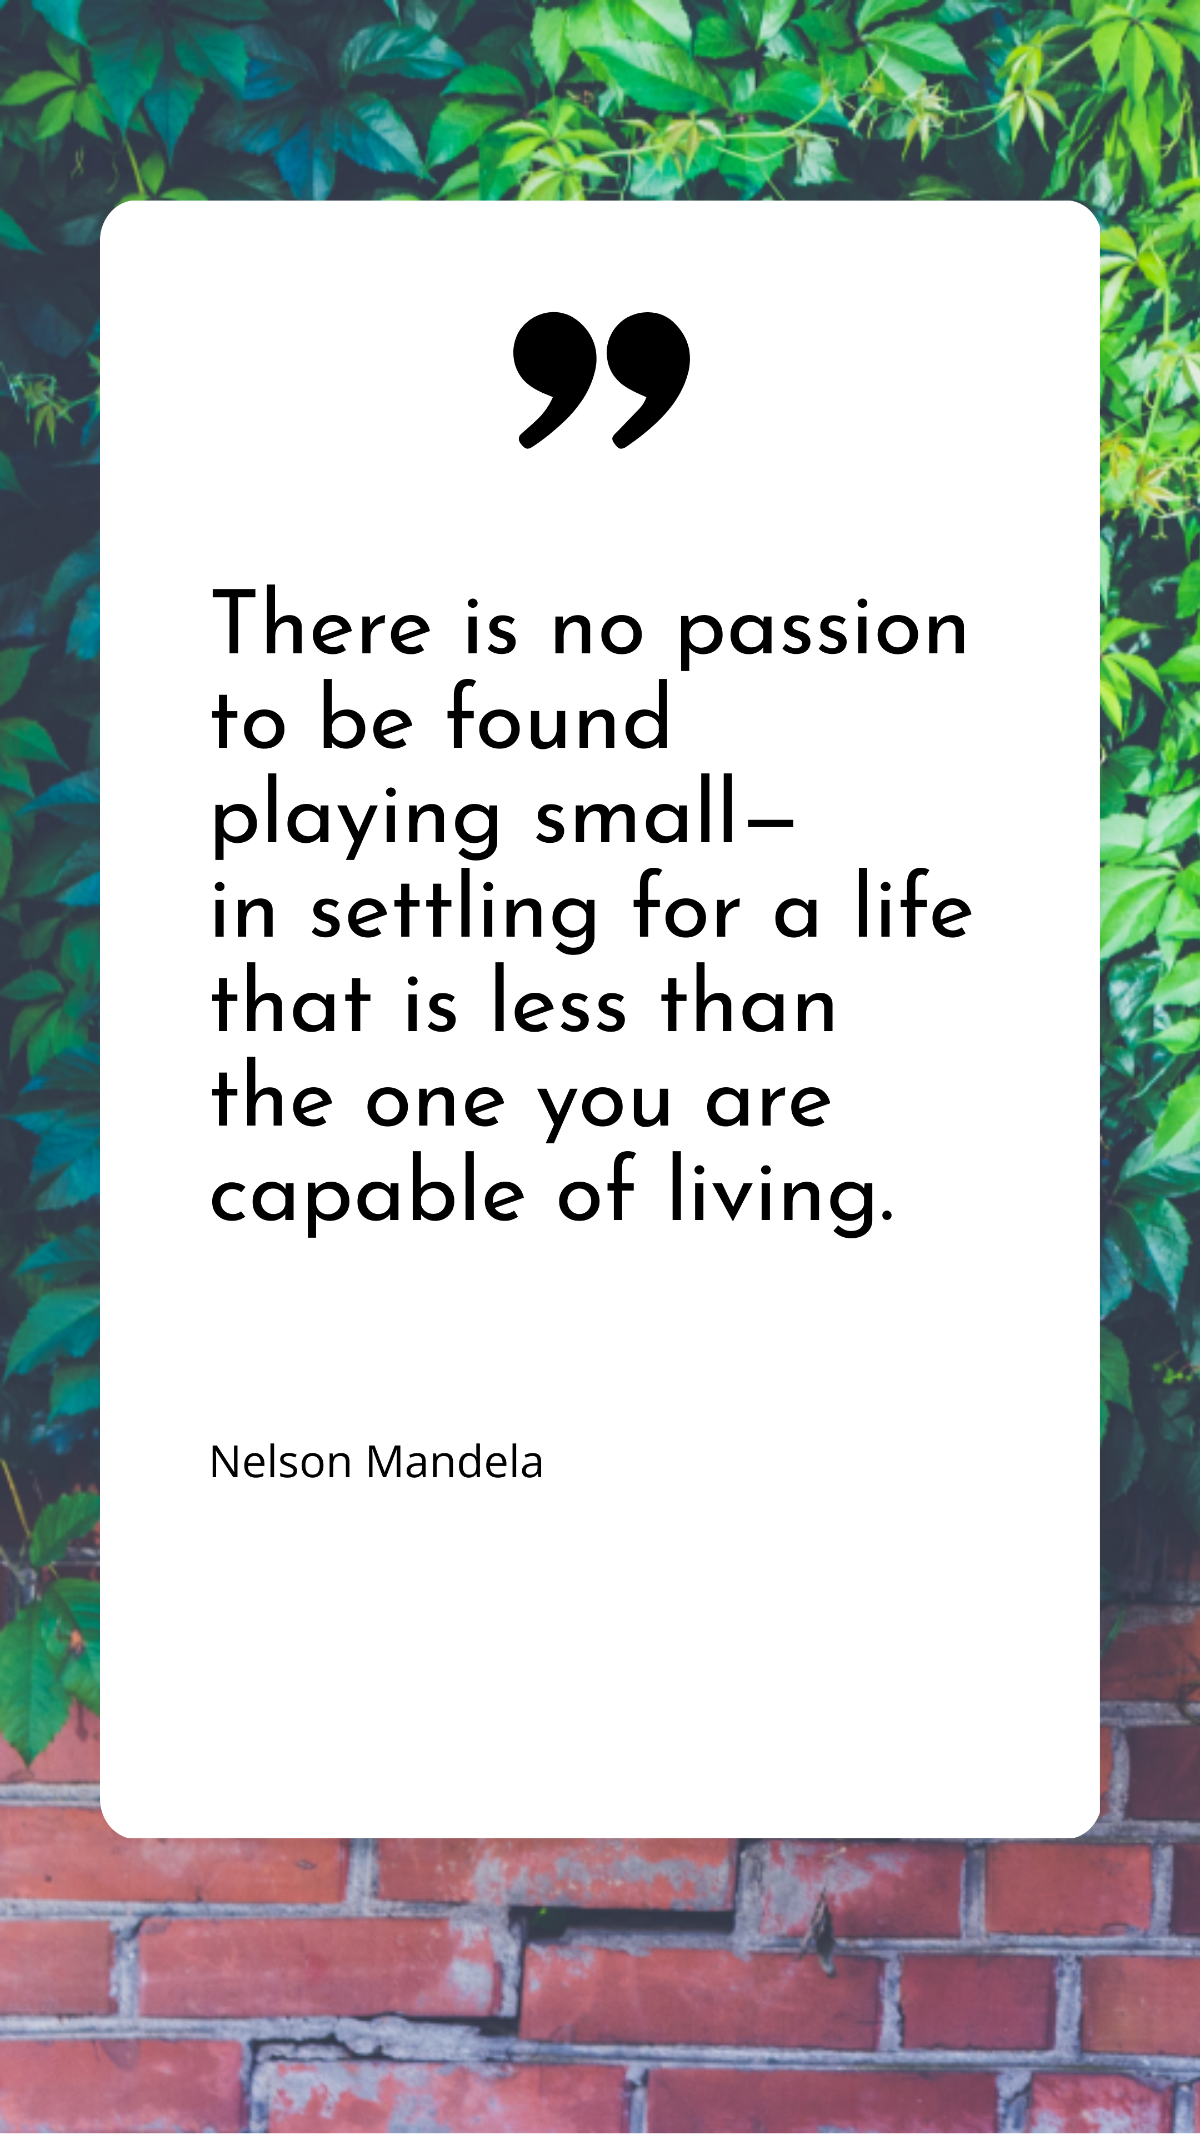 Nelson Mandela - There is no passion to be found playing small - in settling for a life that is less than the one you are capable of living. Template